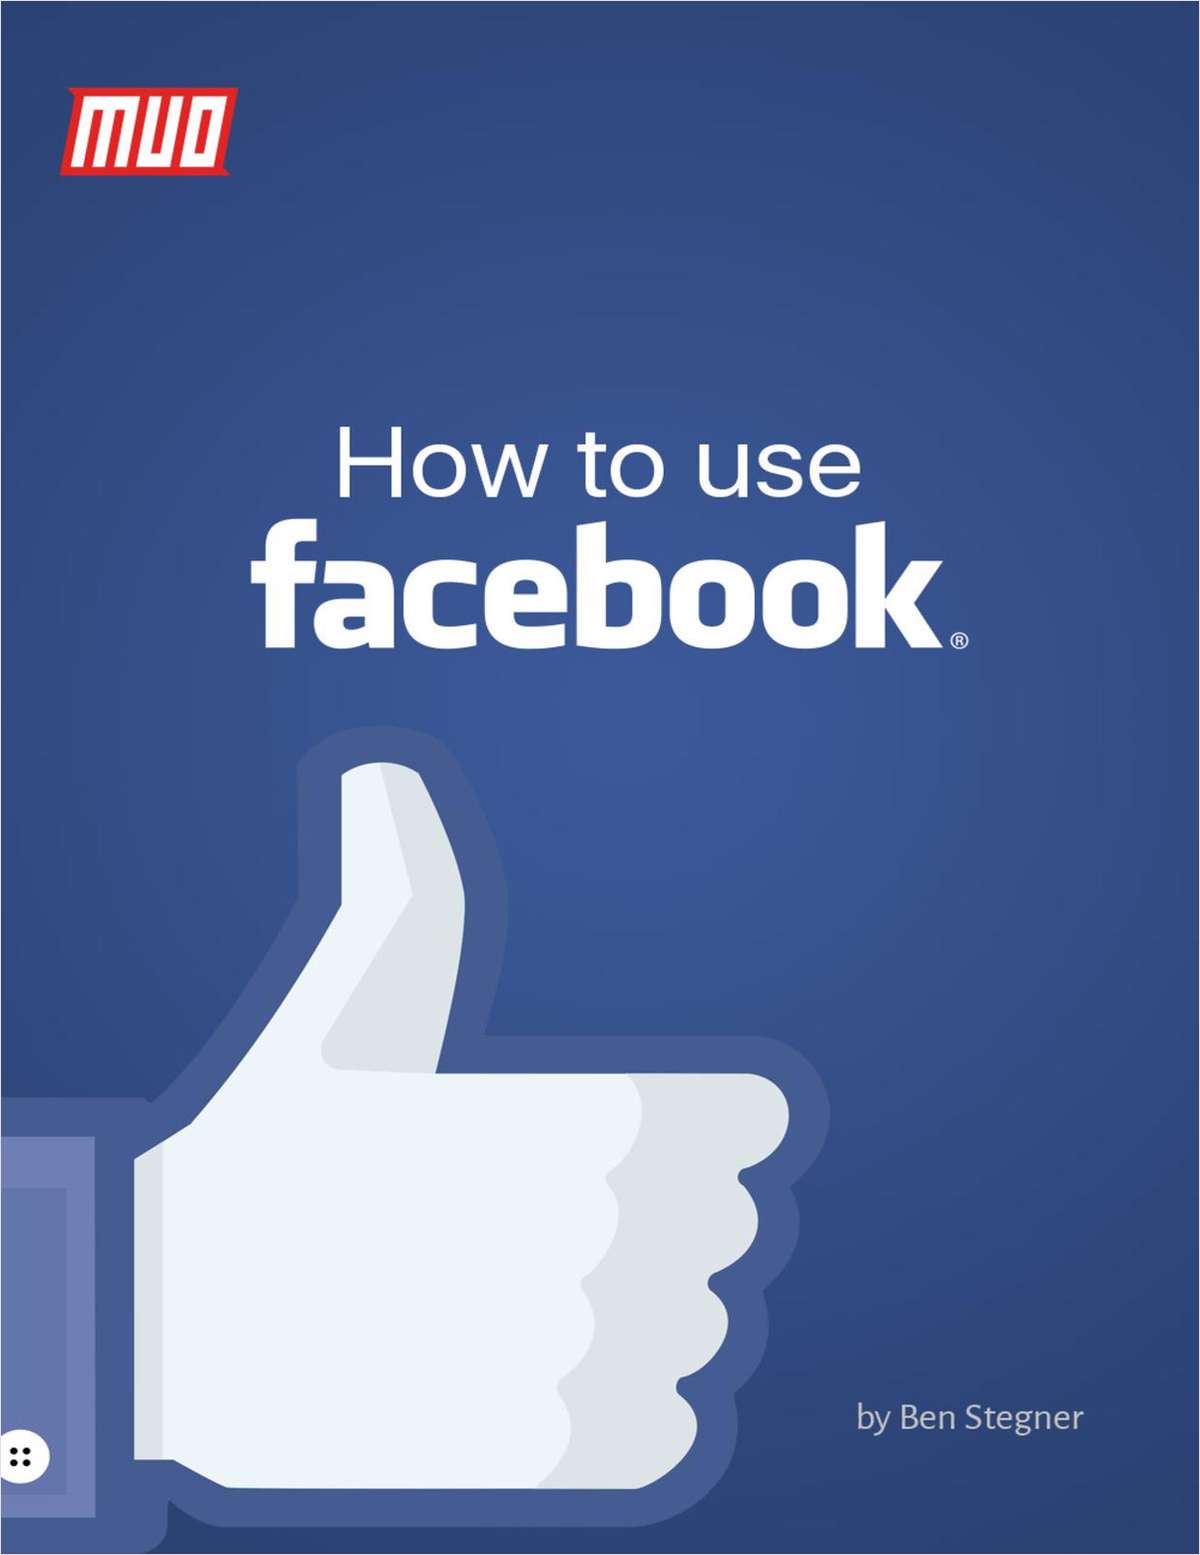 How to Use Facebook Free Guide